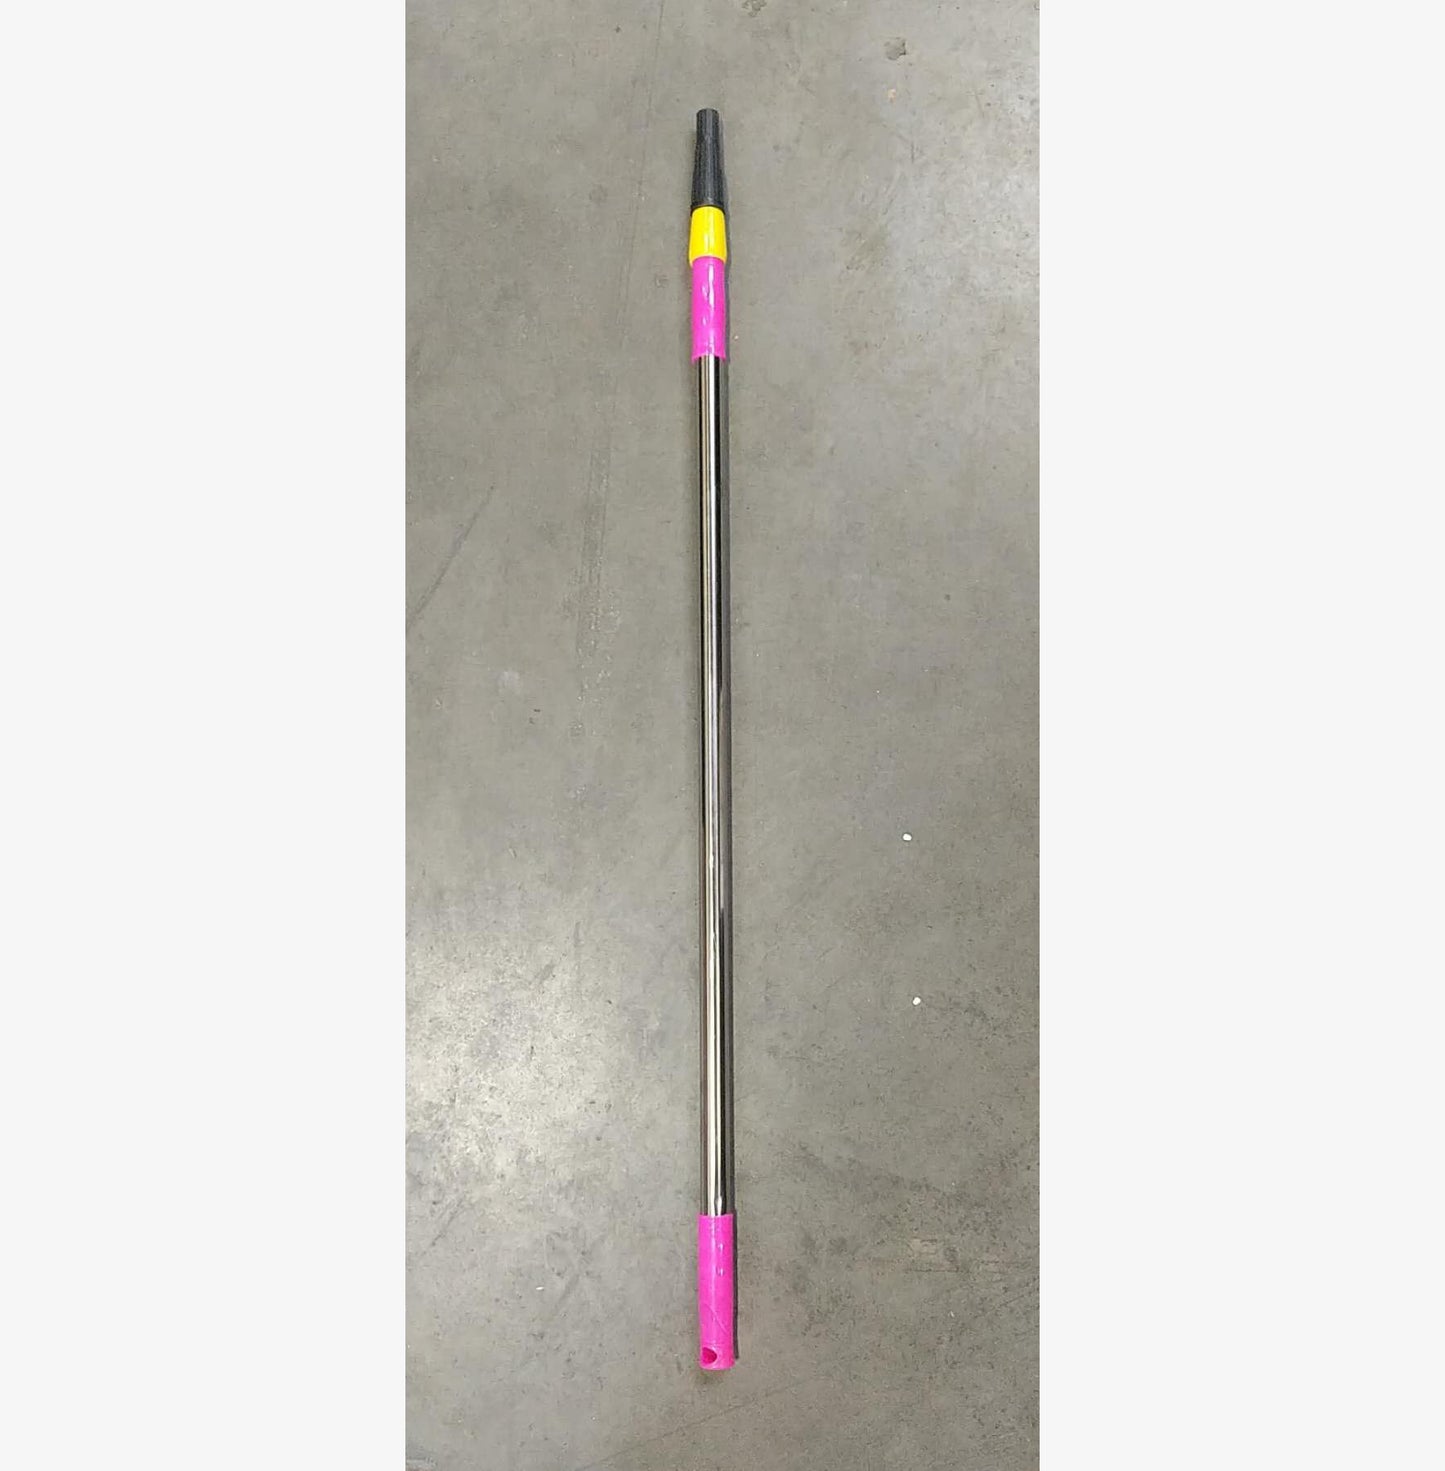 YELLOW+PINK 2M/6.6" ONE WAY EXTENDABLE ROD CHROME $3.99